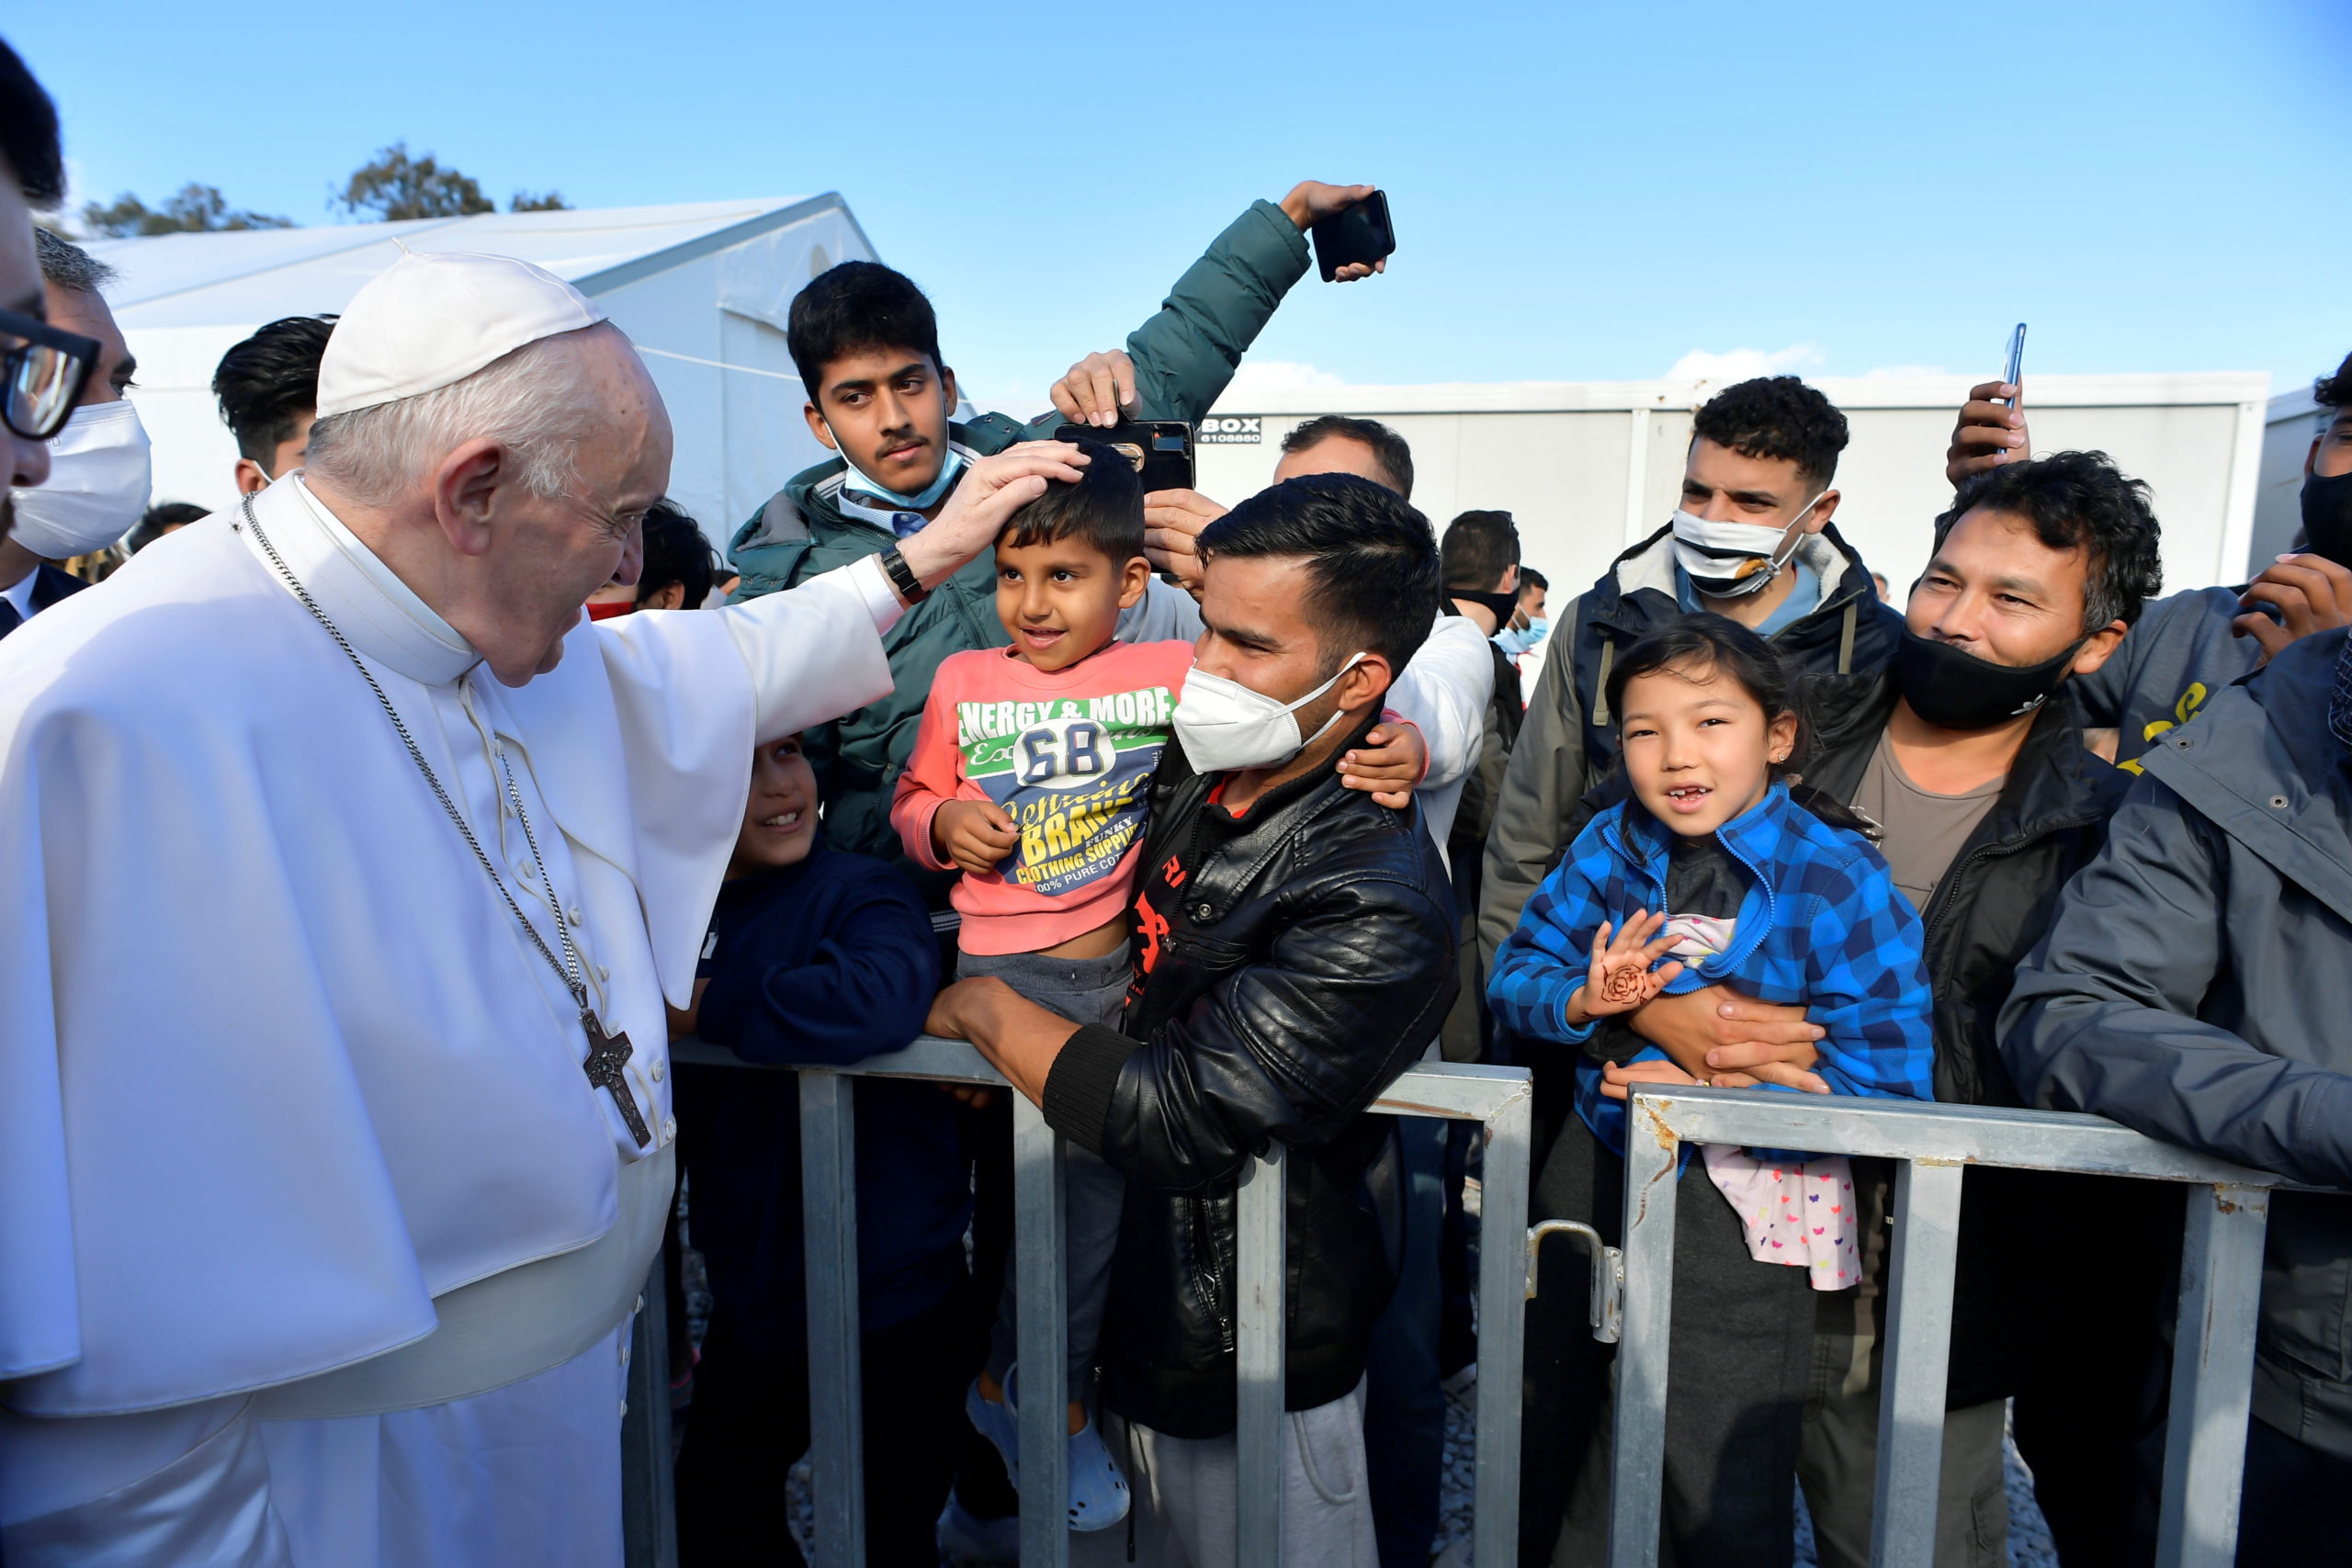 Pope Francis visits the island of Lesbos to meet with the the refugees and migrants at the Mavrovouni camp, Greece, December 5, 2021. Vatican Media/­Handout via REUTERS